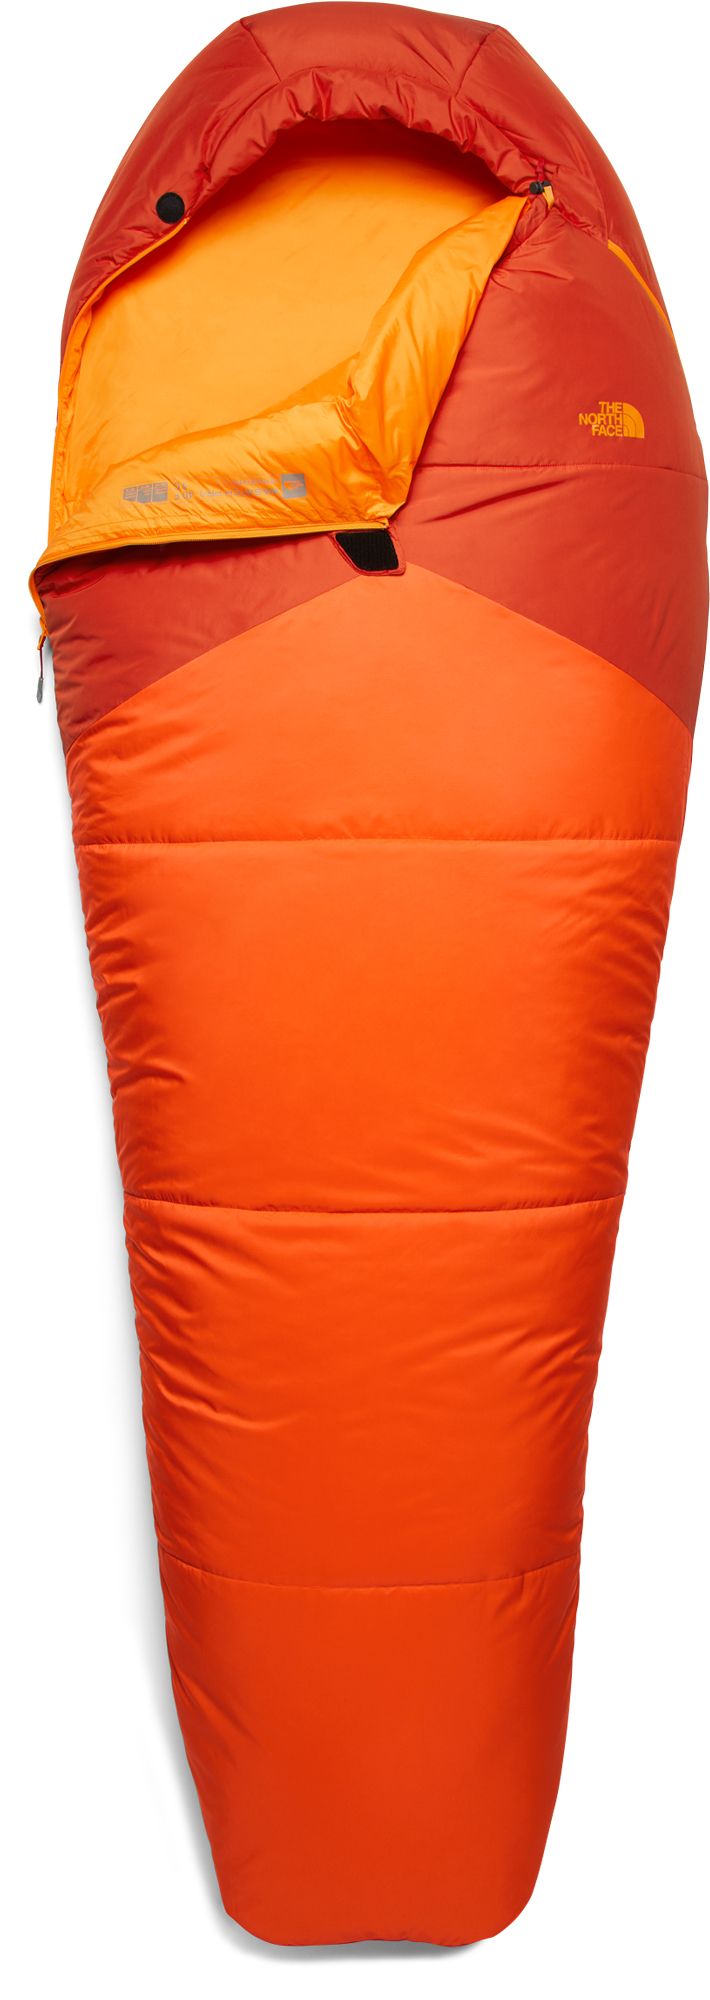 Photos - Other Bags & Accessories The North Face North Face Wasatch Pro 40 Sleeping Bag, Men's, Regular, Zion Org/Fremescen 